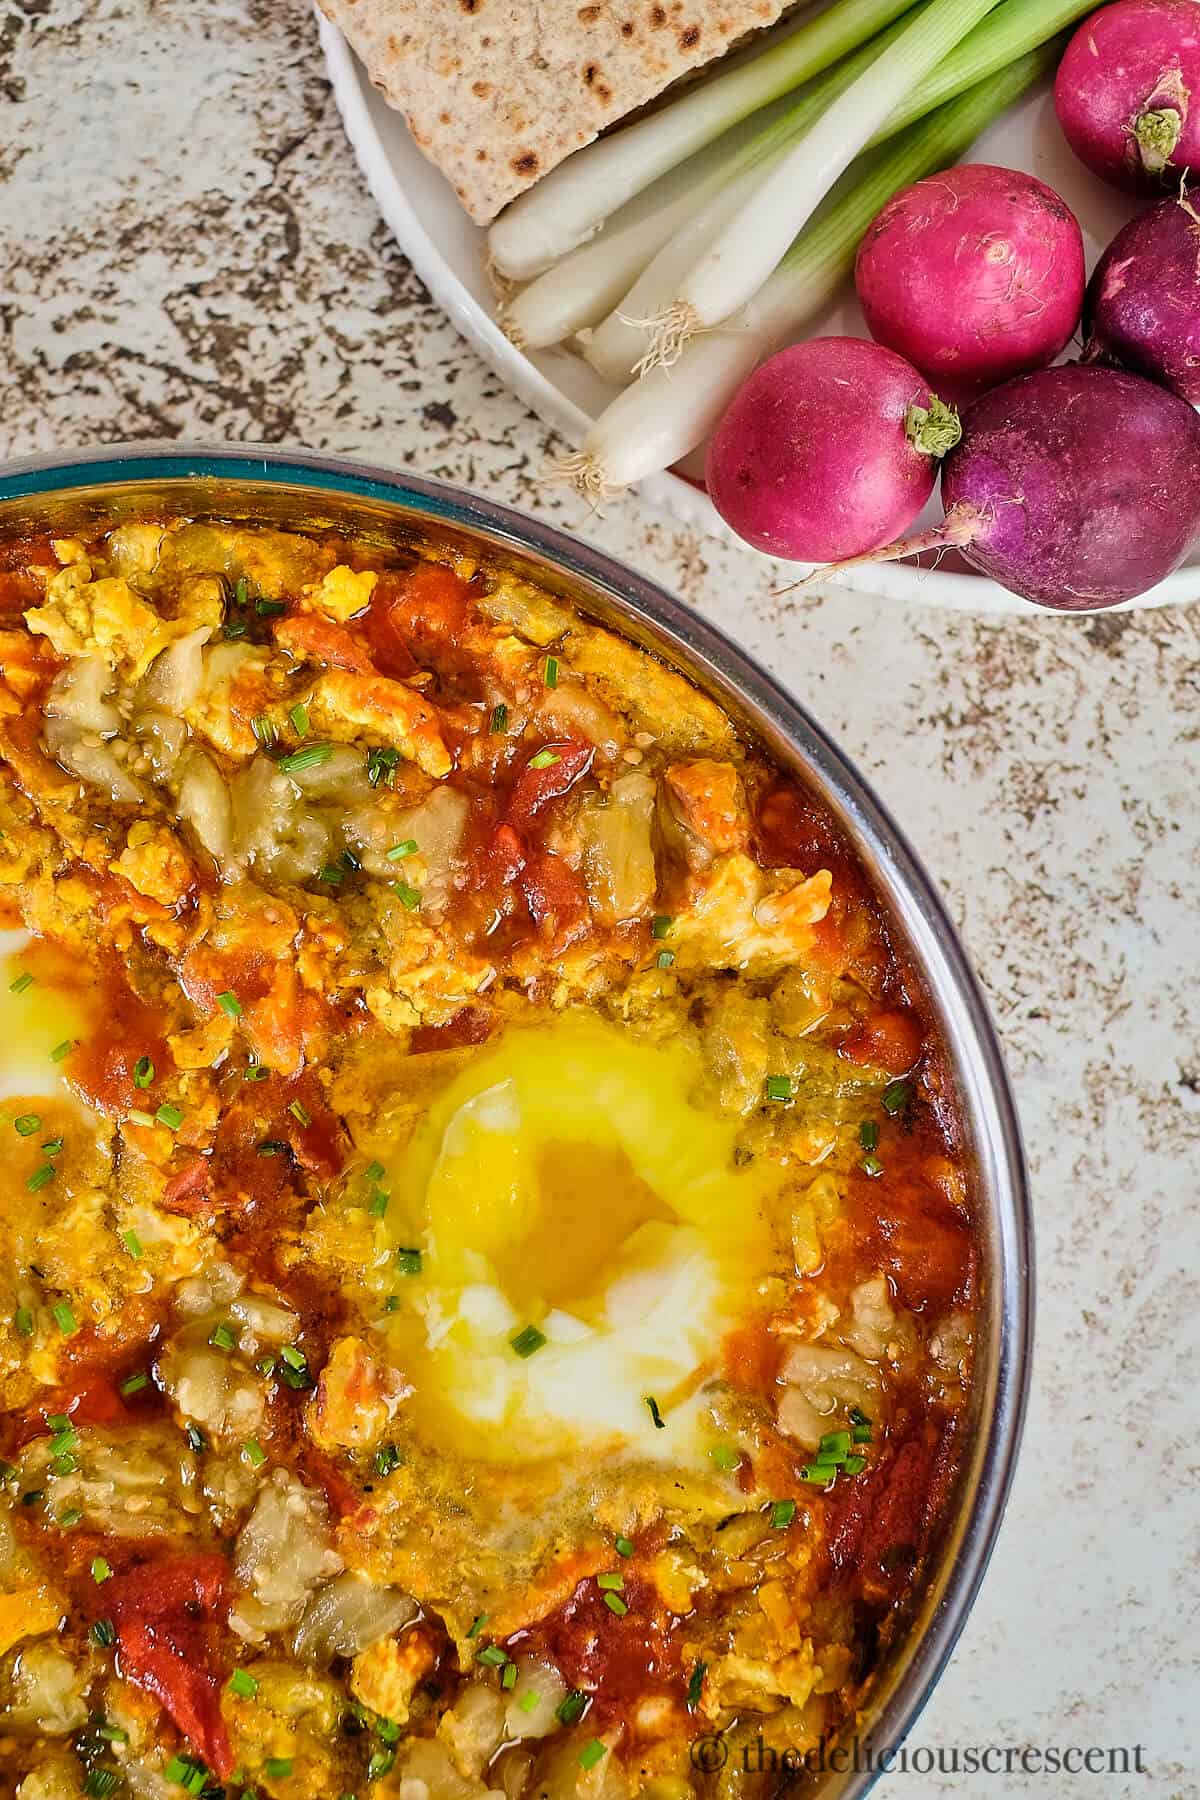 Eggplants with eggs in a dish.